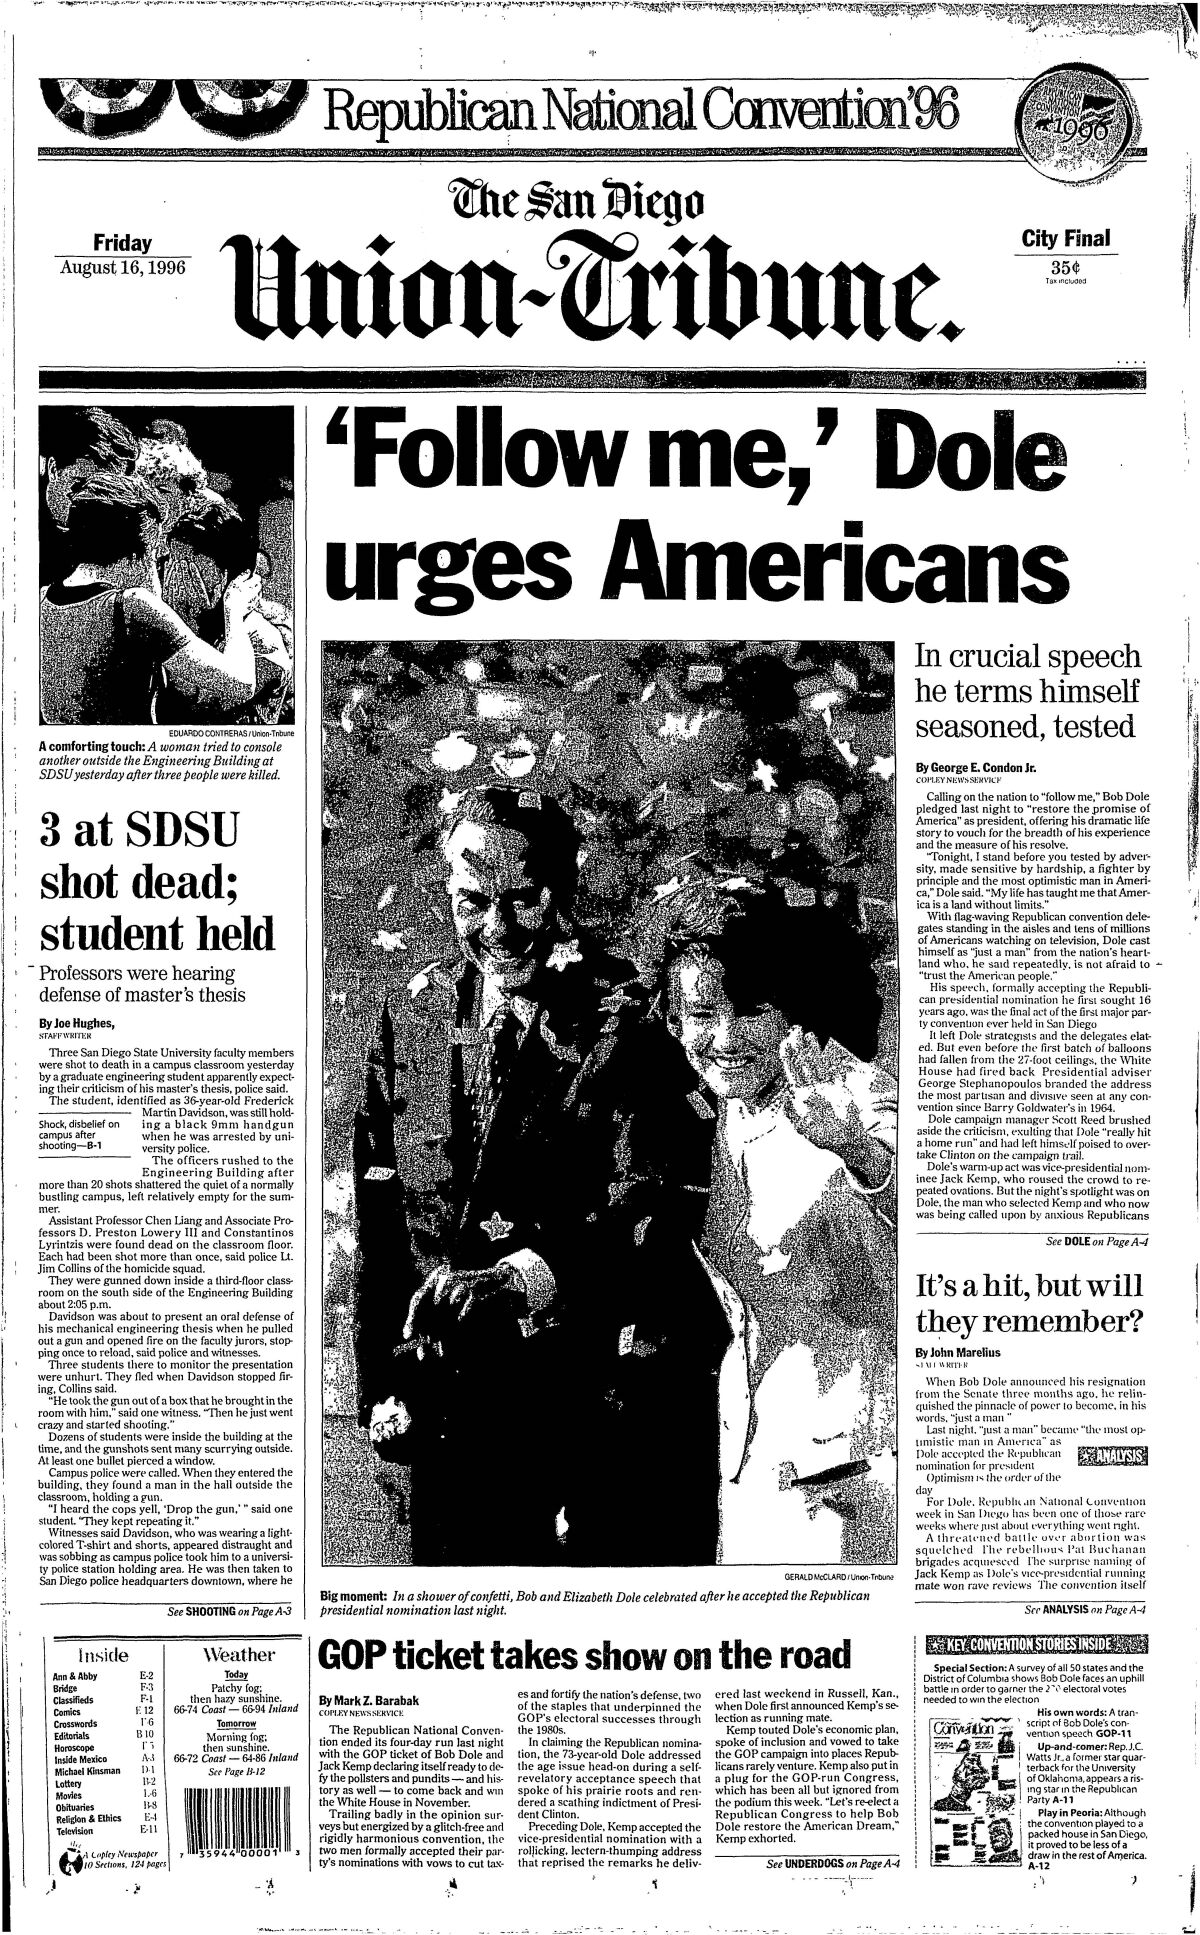 Front page of The San Diego Union-Tribune, August 16, 1996.